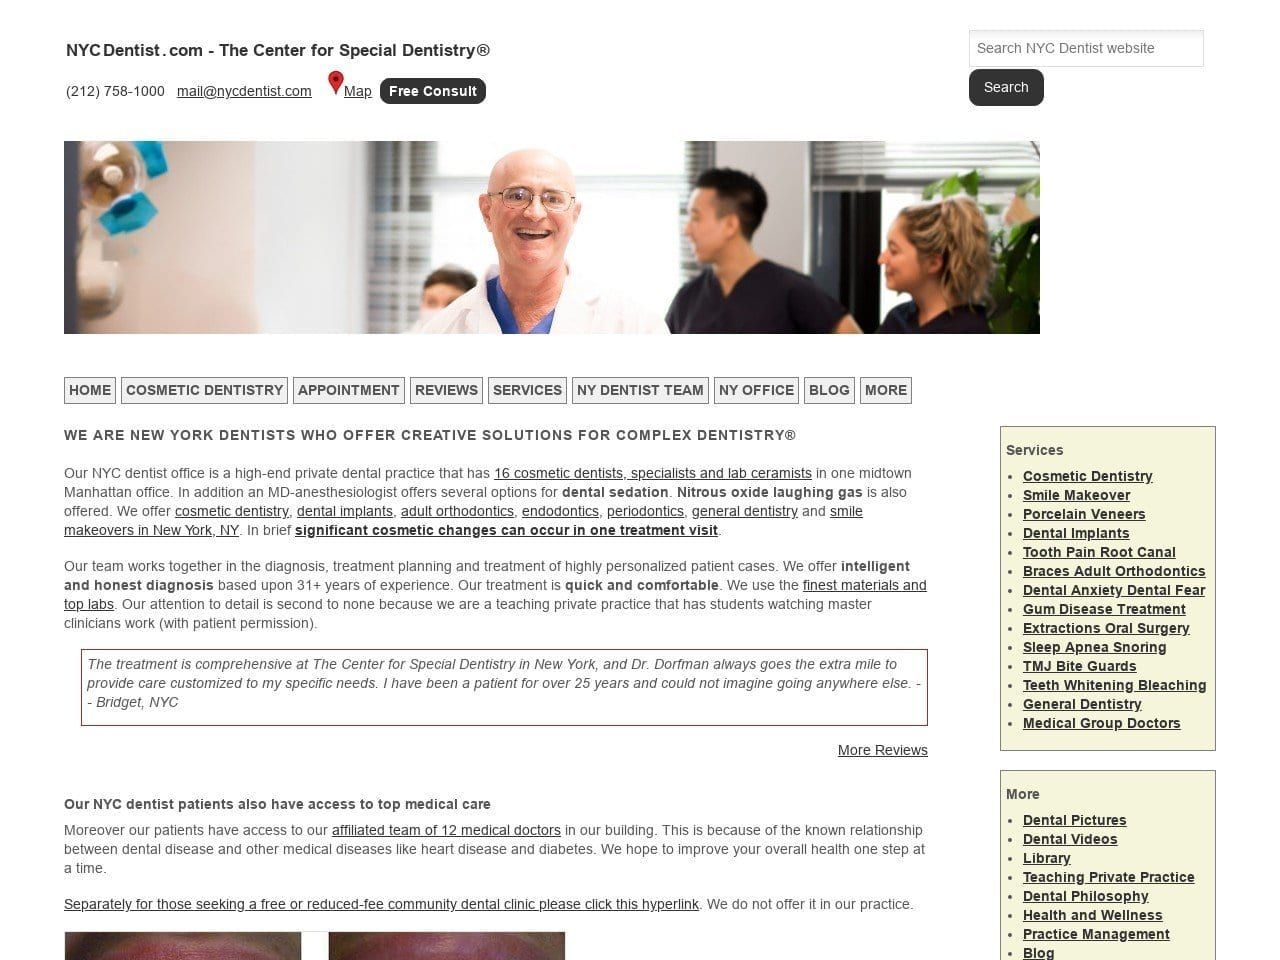 The Center For Special Dentistryc B. Website Screenshot from nycdentist.com